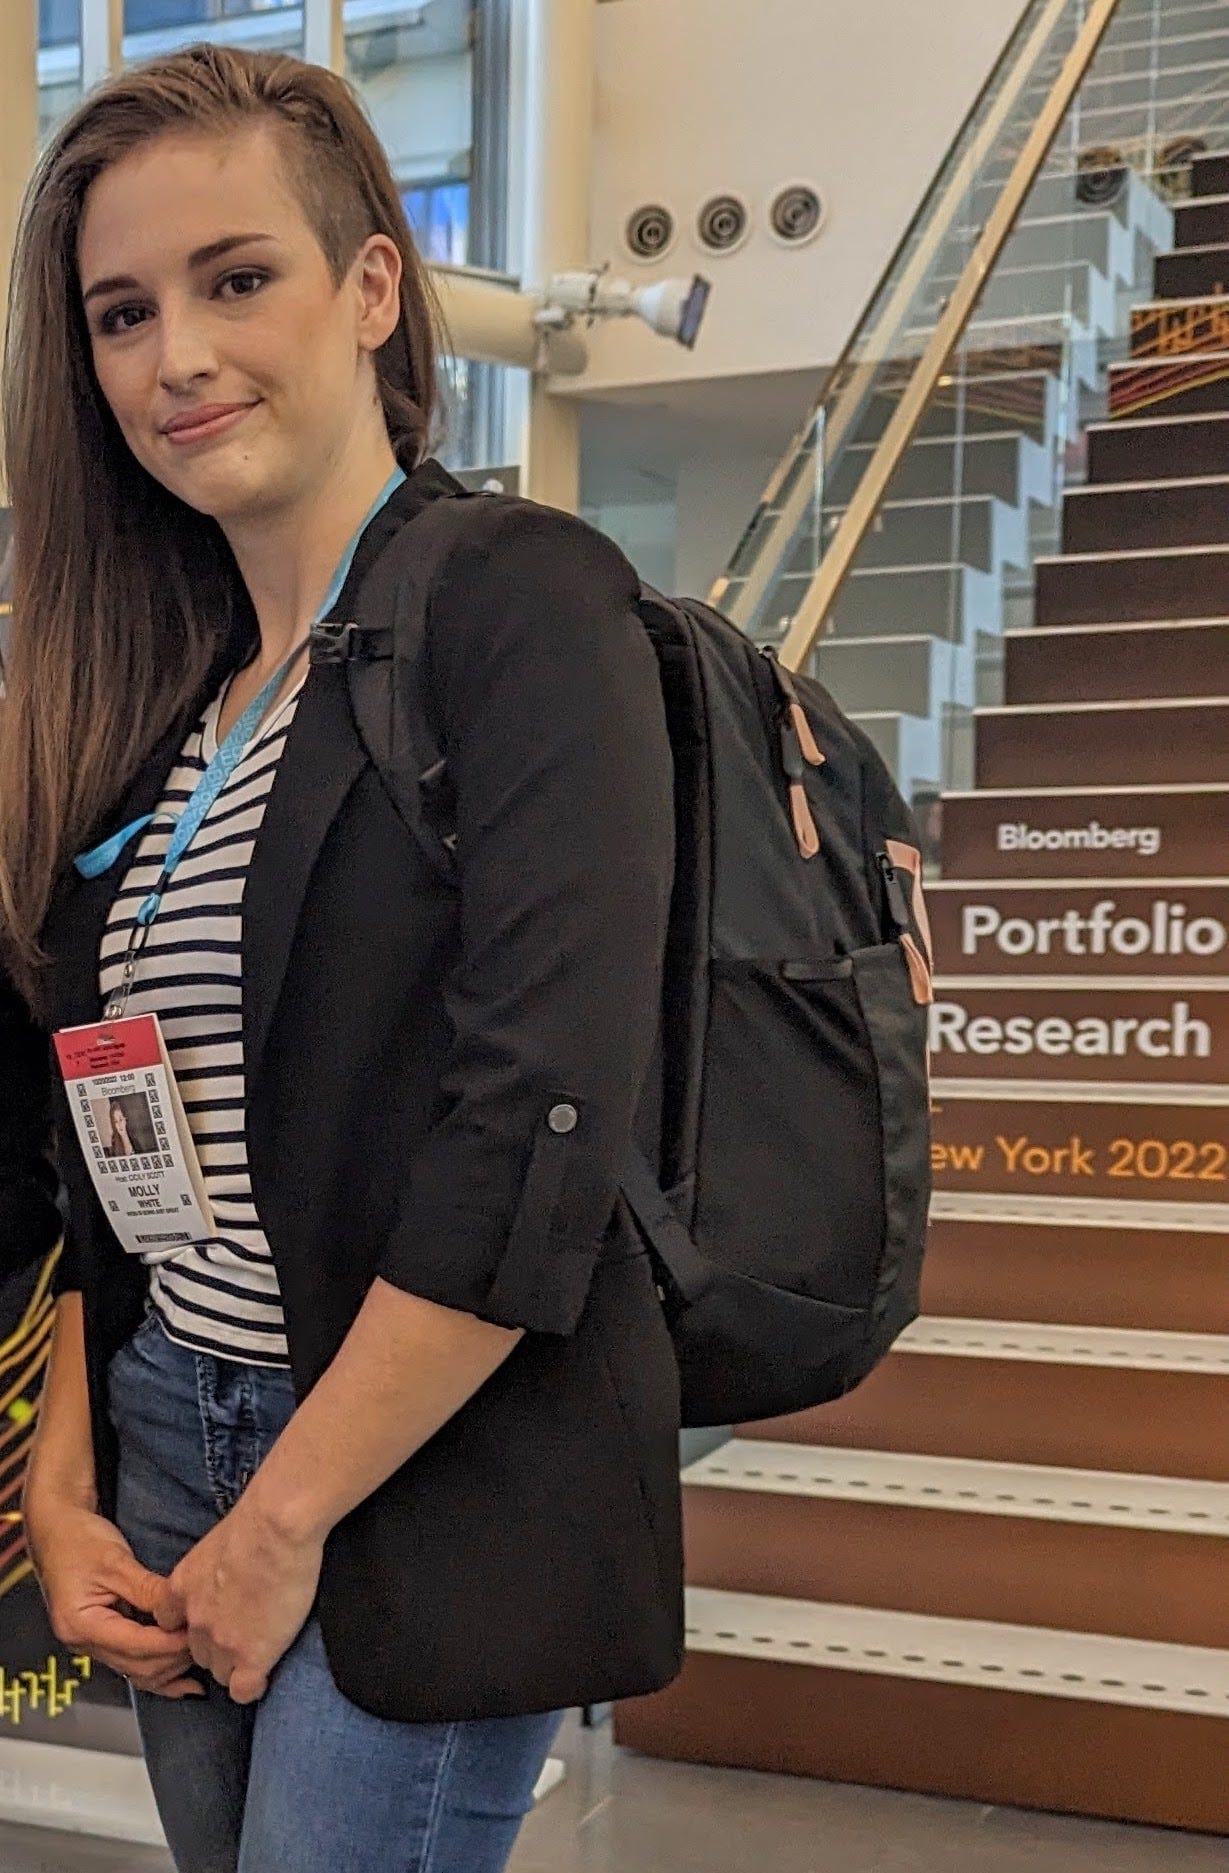 Photo of Molly standing in an office building. She's wearing a white and navy striped shirt, a black blazer, and jeans. Behind her is a large staircase with the text "Bloomberg Portfolio Research New York 2022" printed on the risers.